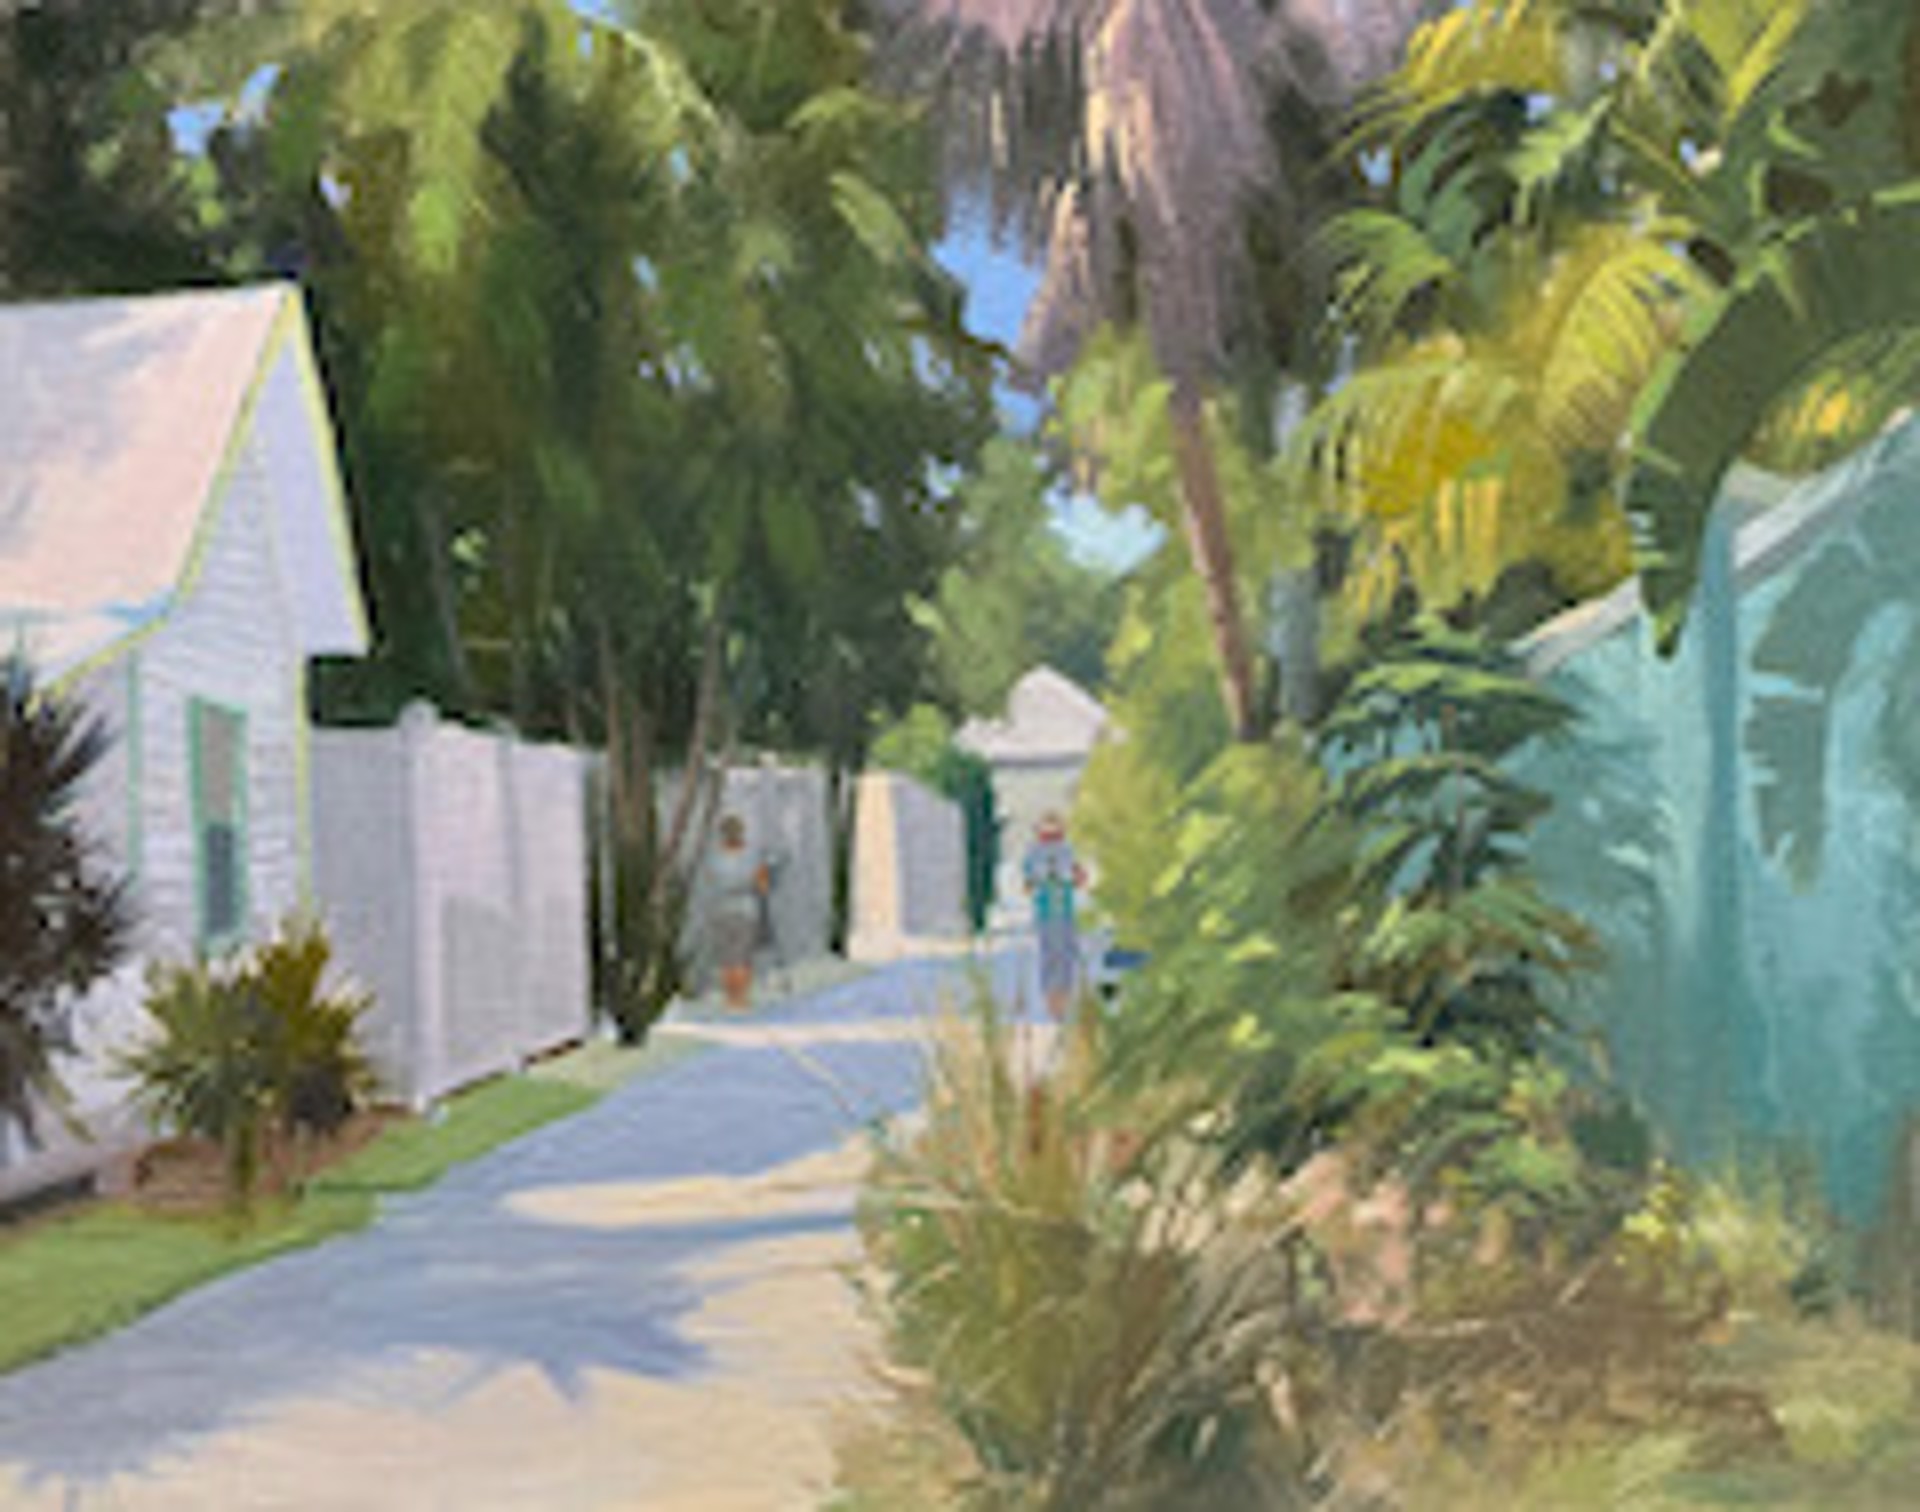 Plein Air Painting on the Alley by Morgan Samuel Price